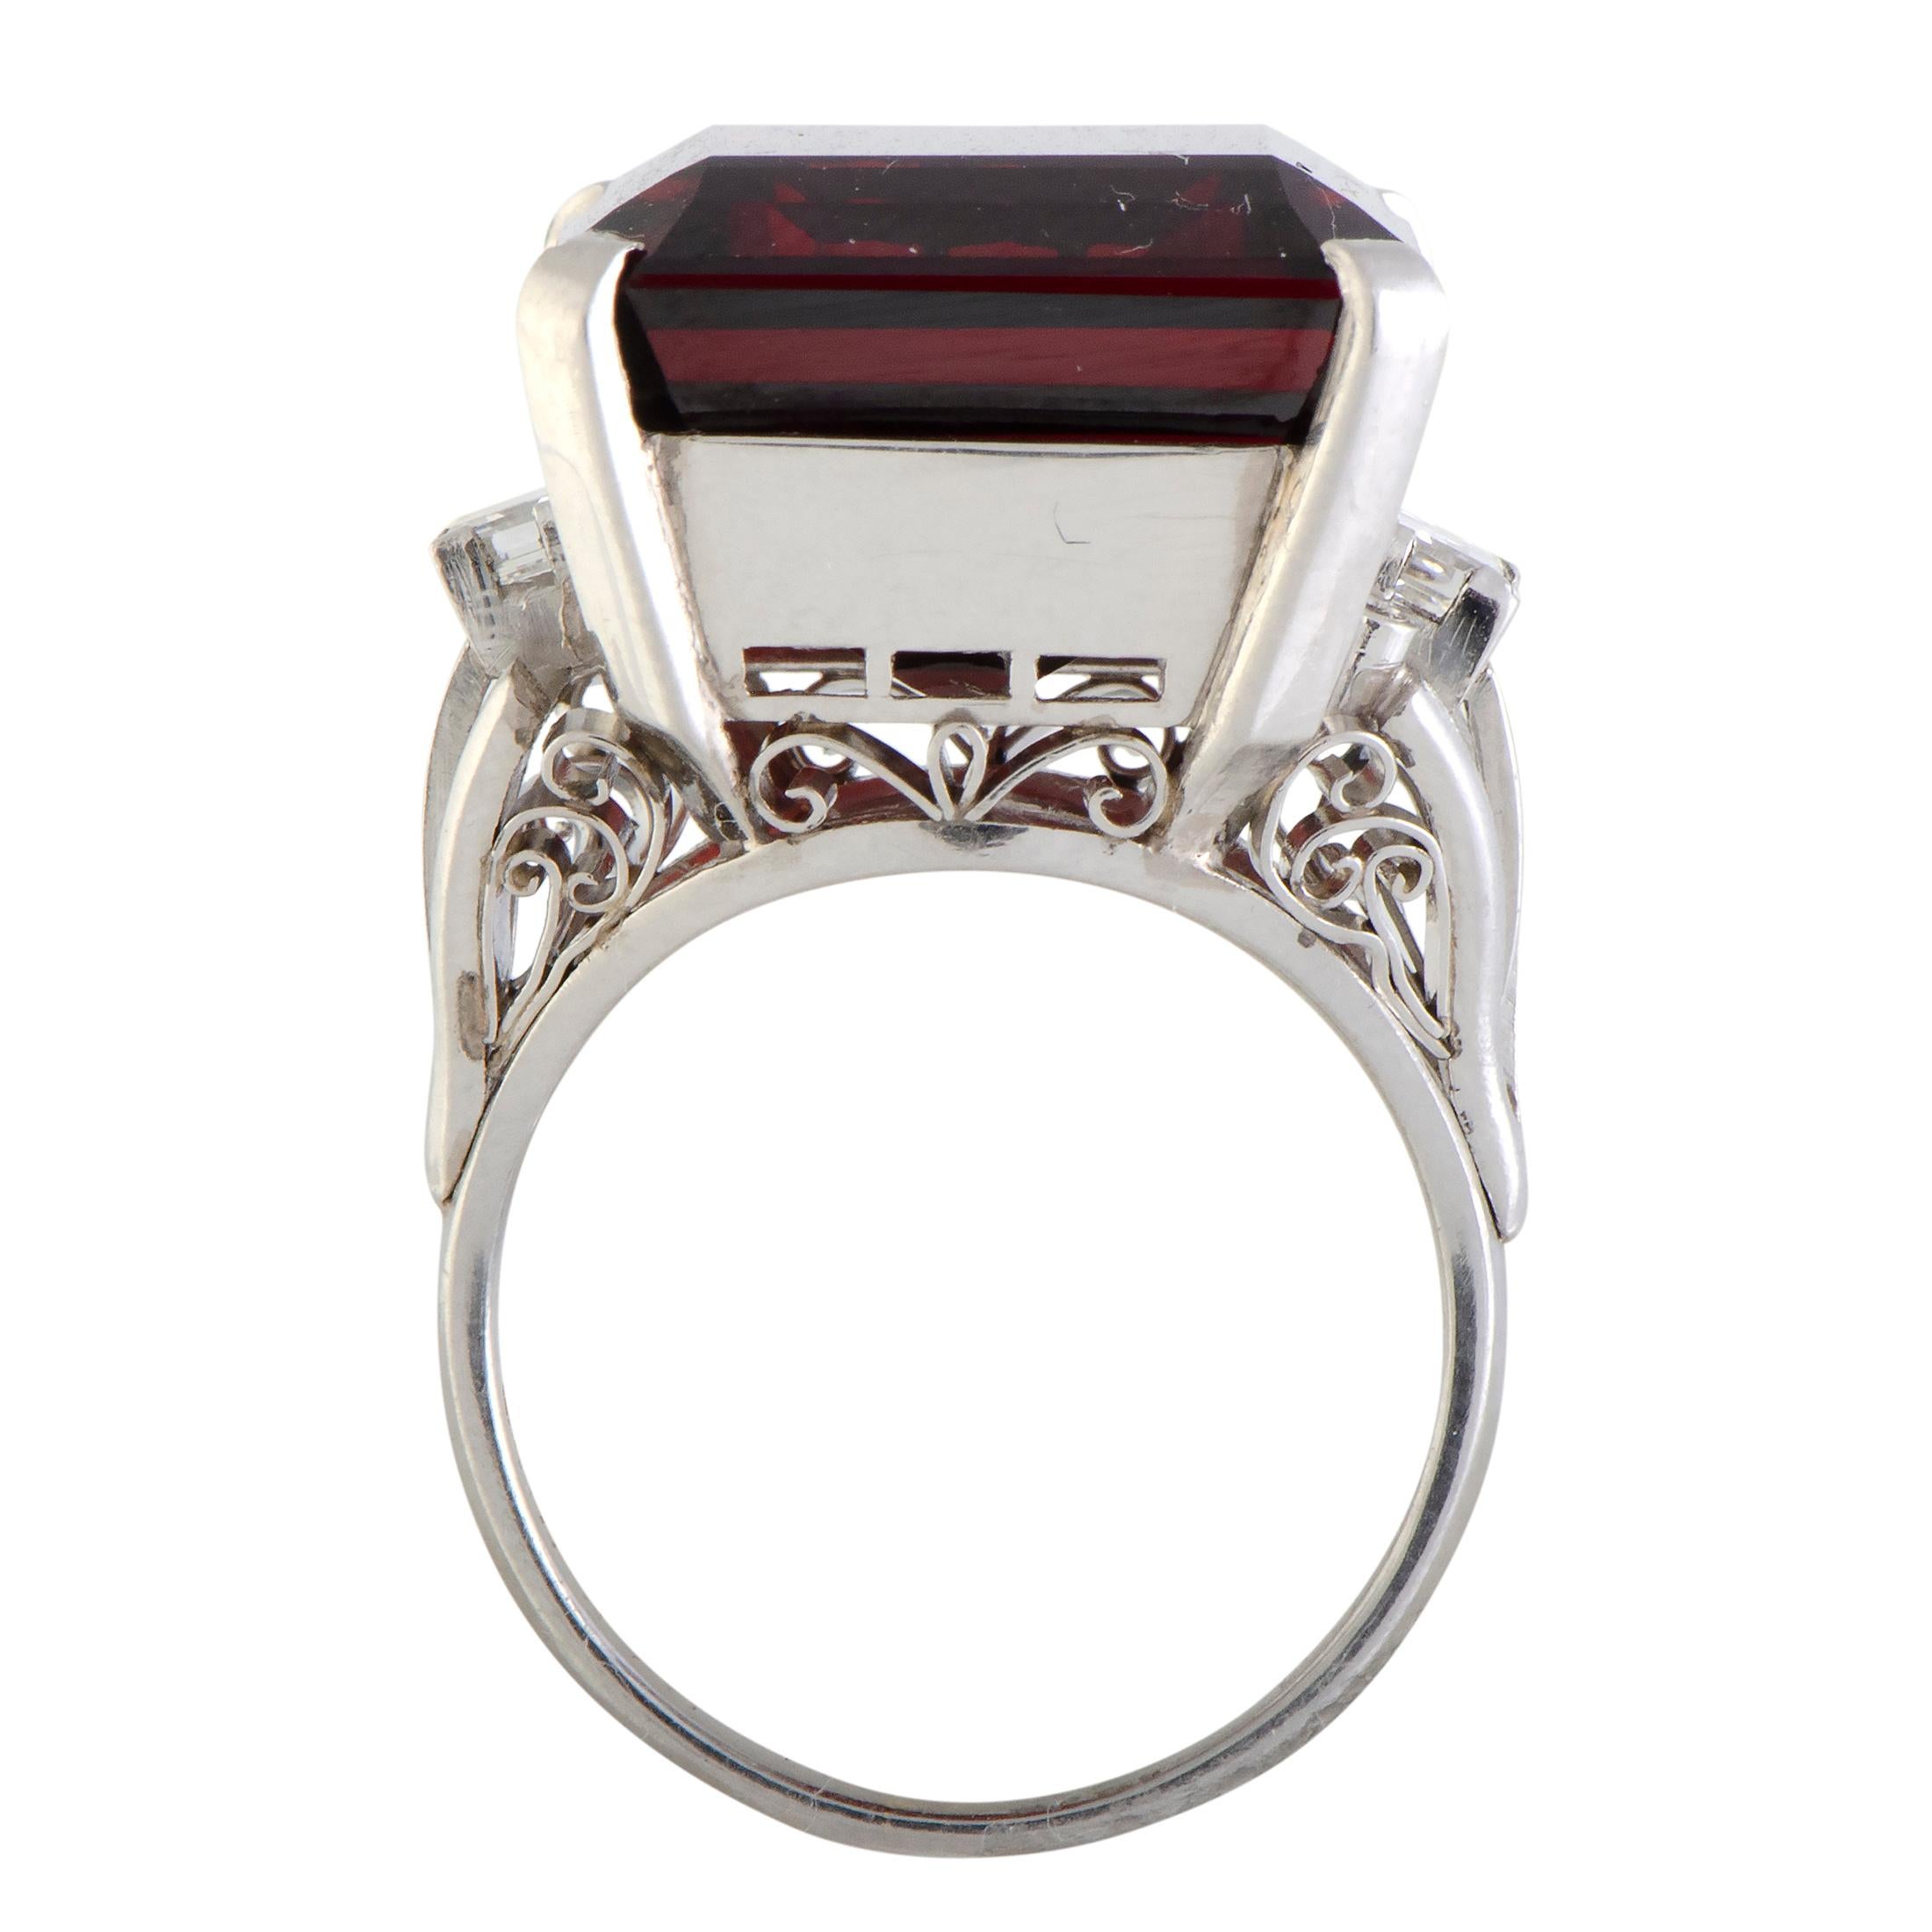 A stunningly regal look is created in this majestic ring by presenting an exceptionally refined design in prestigious platinum and using it as a sublime pedestal for an expertly cut garnet. The garnet weighs approximately 16.00 carats and it is